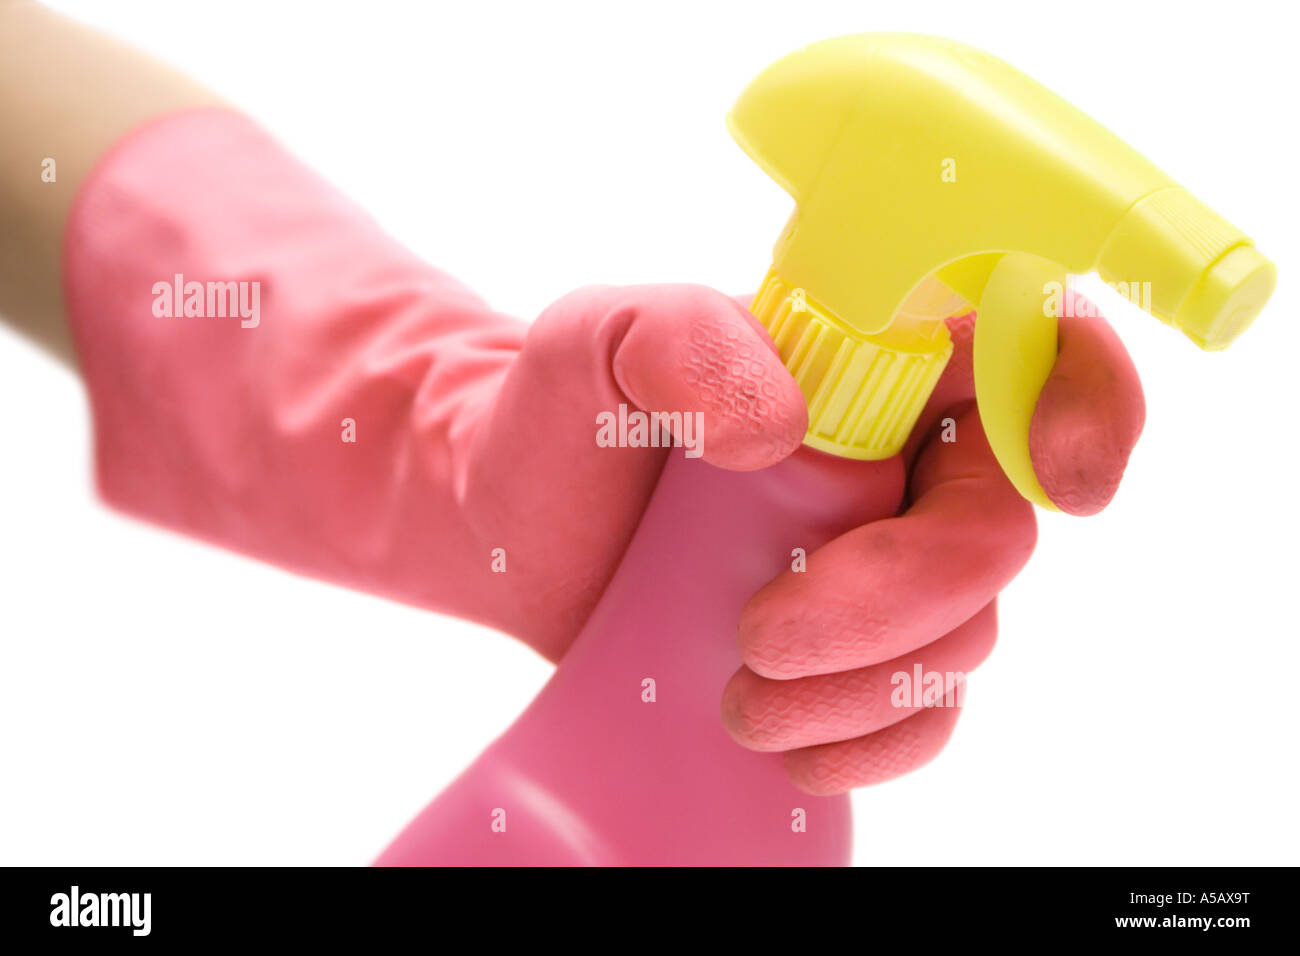 Pink gloves and a cleaning agent isolated on a white background. Stock Photo